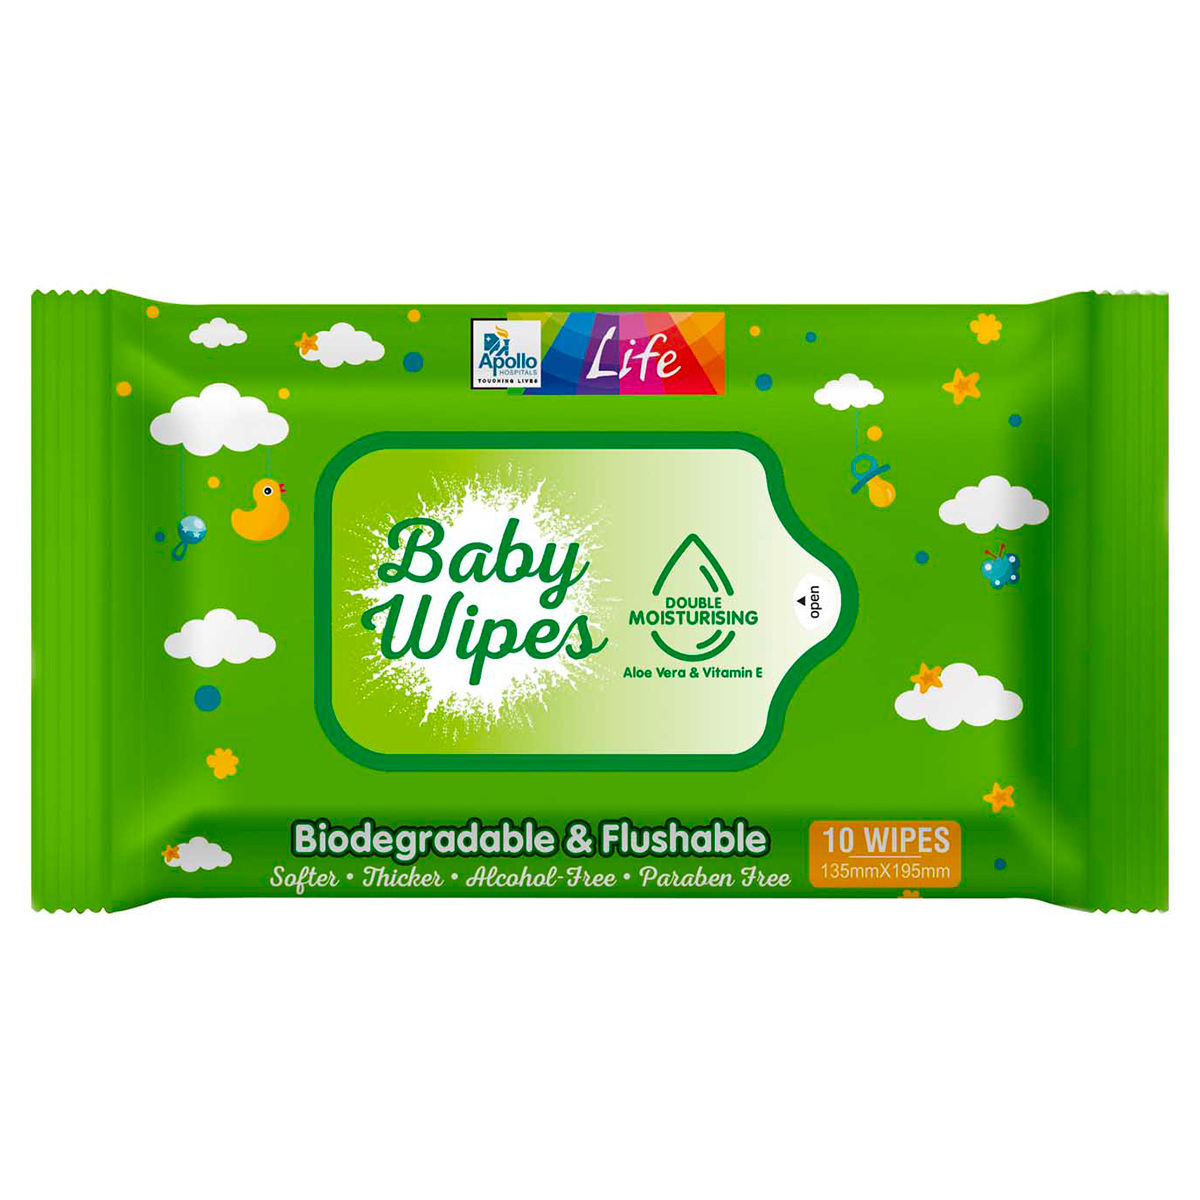 Buy Apollo Pharmacy Biodegradable & Flushable Baby Wipes, 20 (2x10) Count Online